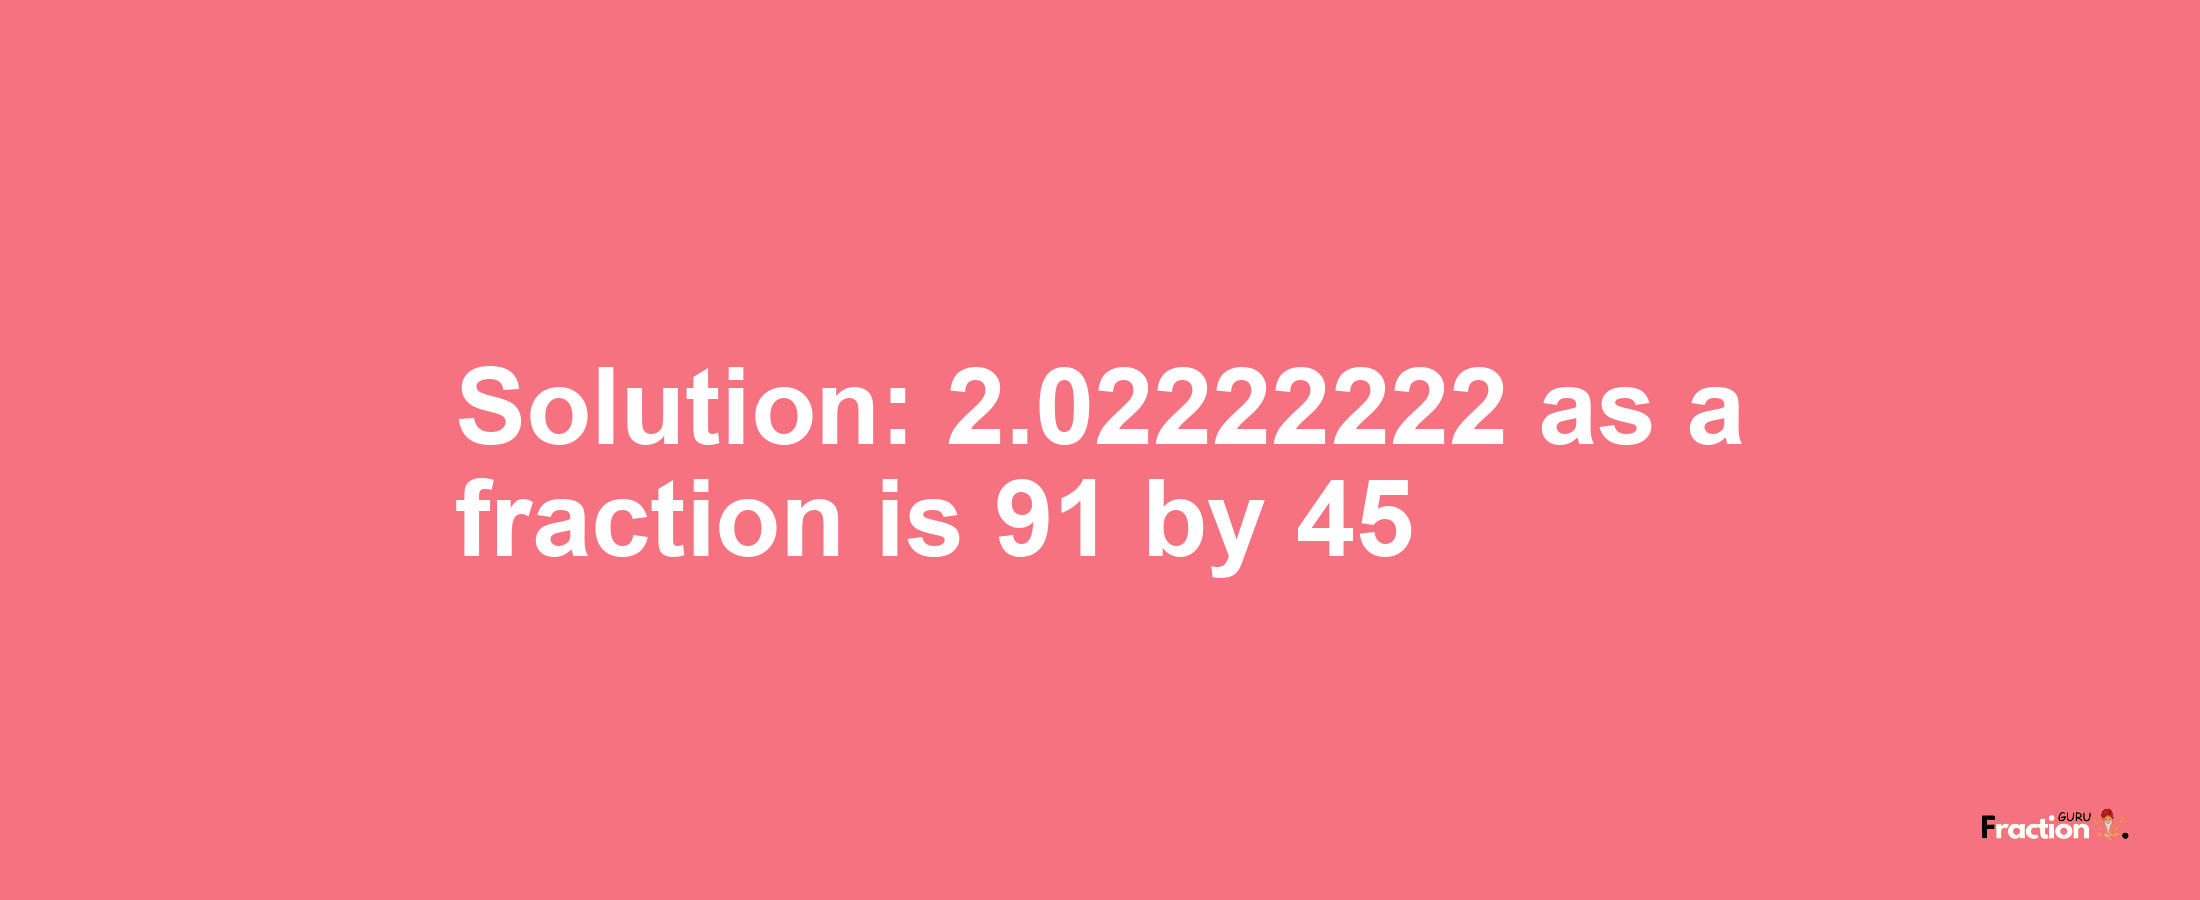 Solution:2.02222222 as a fraction is 91/45